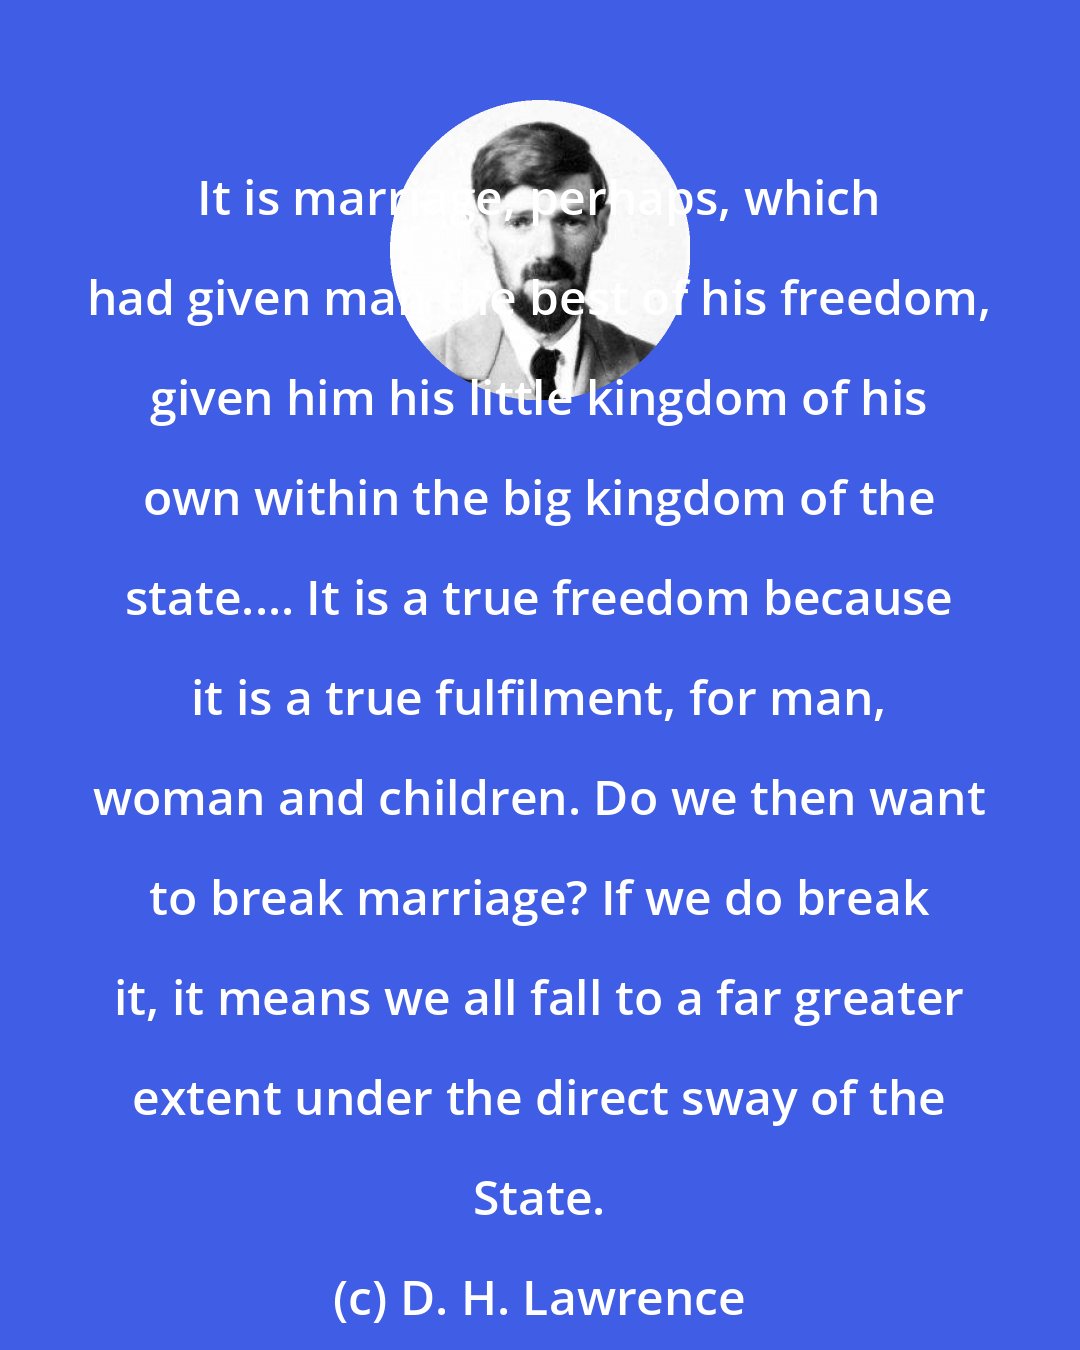 D. H. Lawrence: It is marriage, perhaps, which had given man the best of his freedom, given him his little kingdom of his own within the big kingdom of the state.... It is a true freedom because it is a true fulfilment, for man, woman and children. Do we then want to break marriage? If we do break it, it means we all fall to a far greater extent under the direct sway of the State.